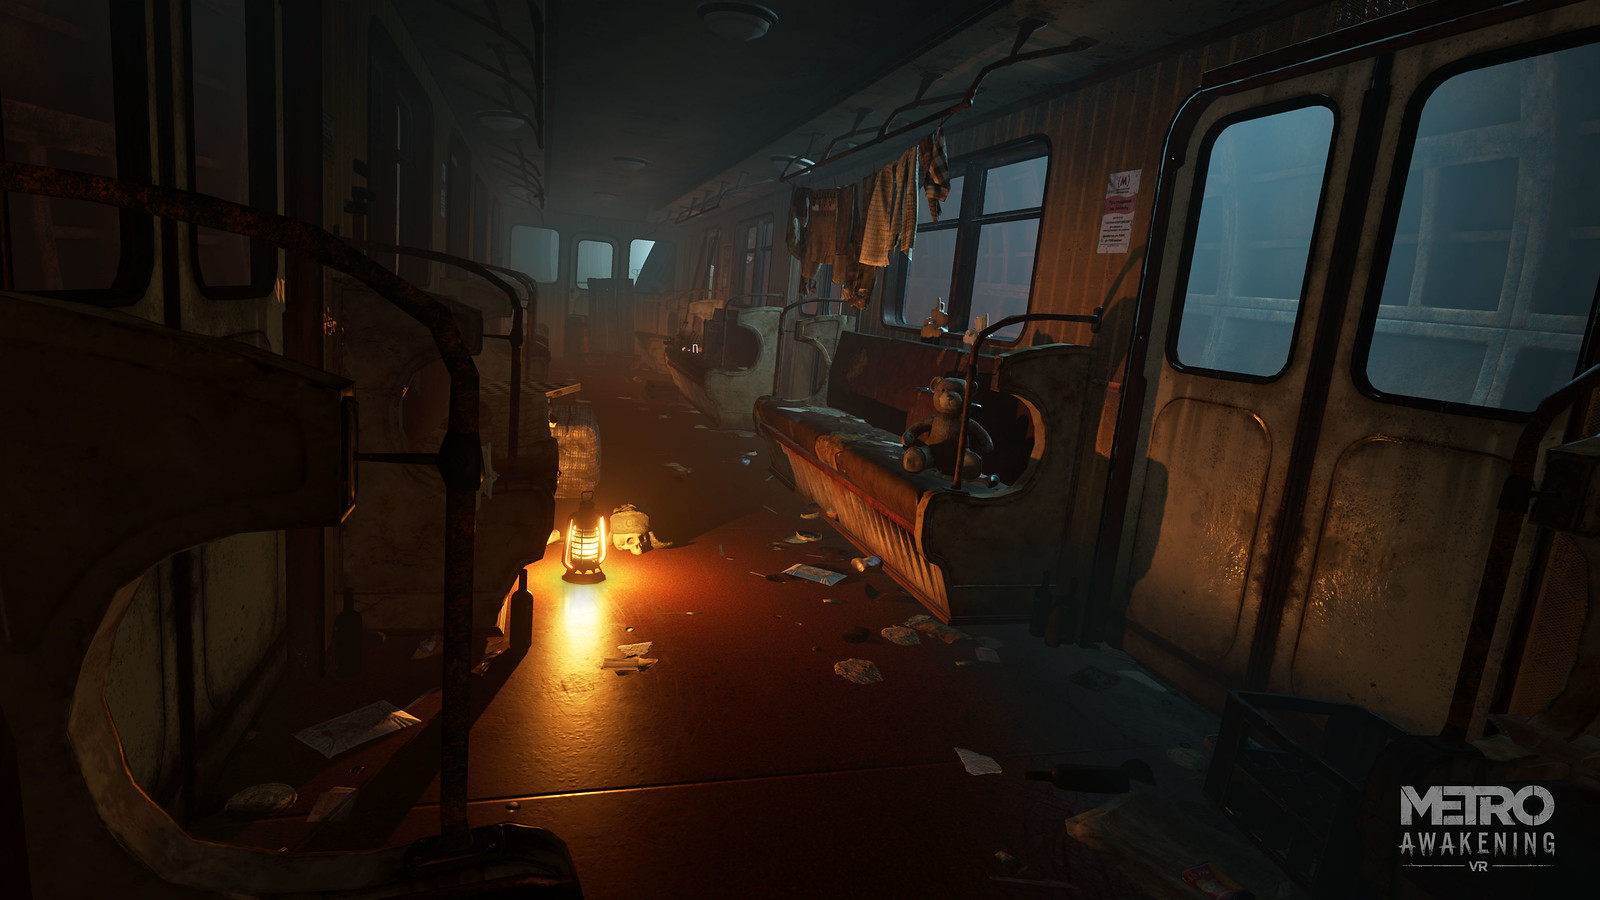 An interior shot of a train carriage, seemingly reappropriated as living quarters, illuminated only be a single lantern left on the floor. A full clothesline stretches across one window, and perched on a seat below is a teddy bear. Cutlery litters the ground, and a human skull, clad in a thick hat, is stationed beside the lantern.